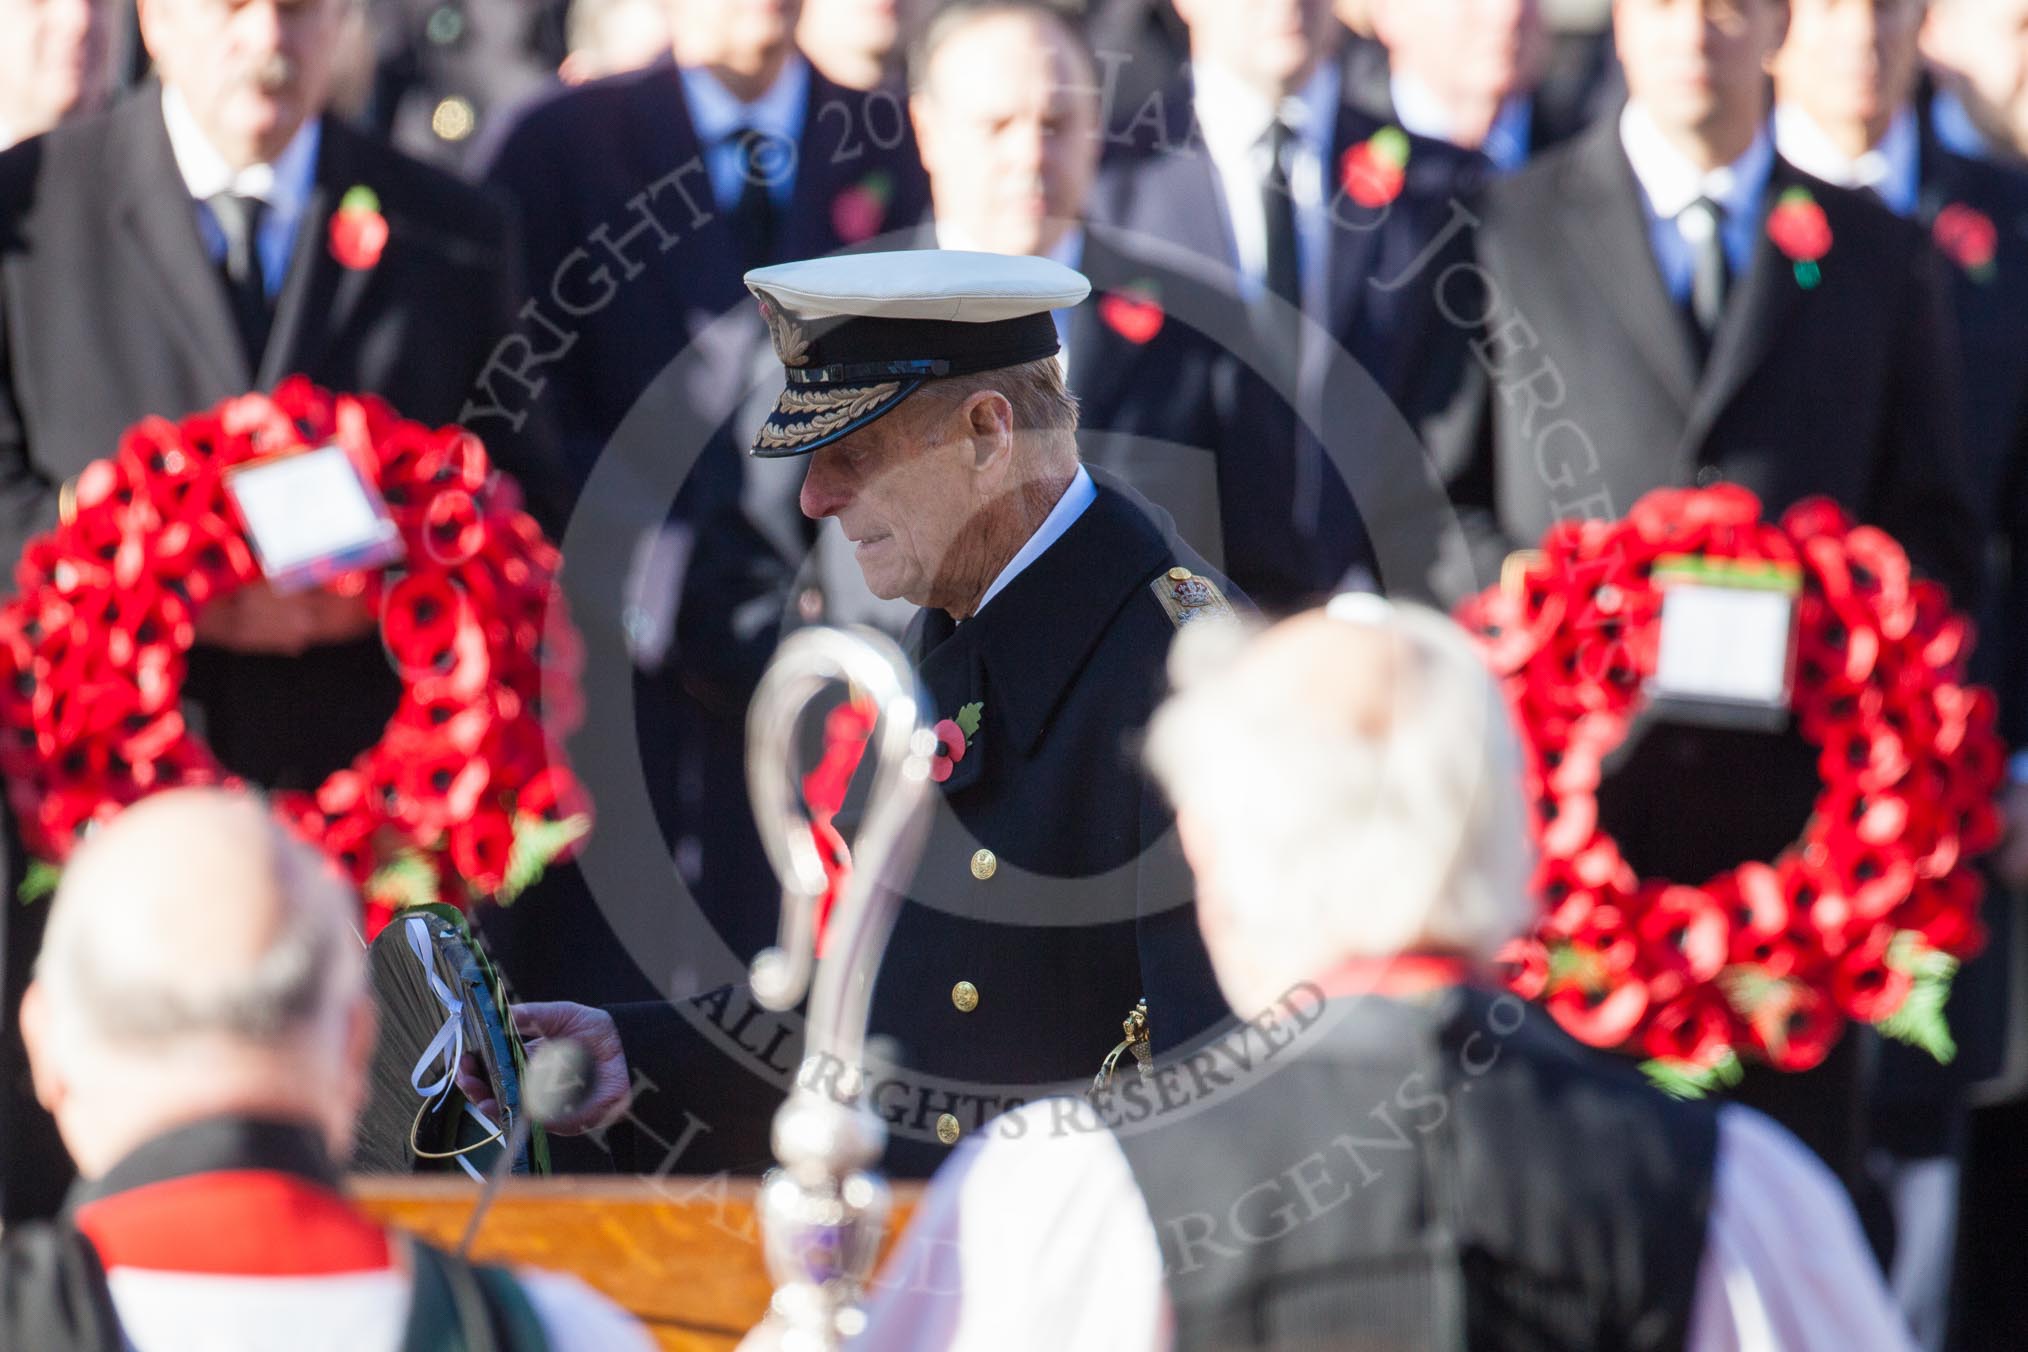 HRH The Duke of Edinburgh, about to lay his wreath at the Cenotaph. In the foreground and unsharp the Bishop of London.